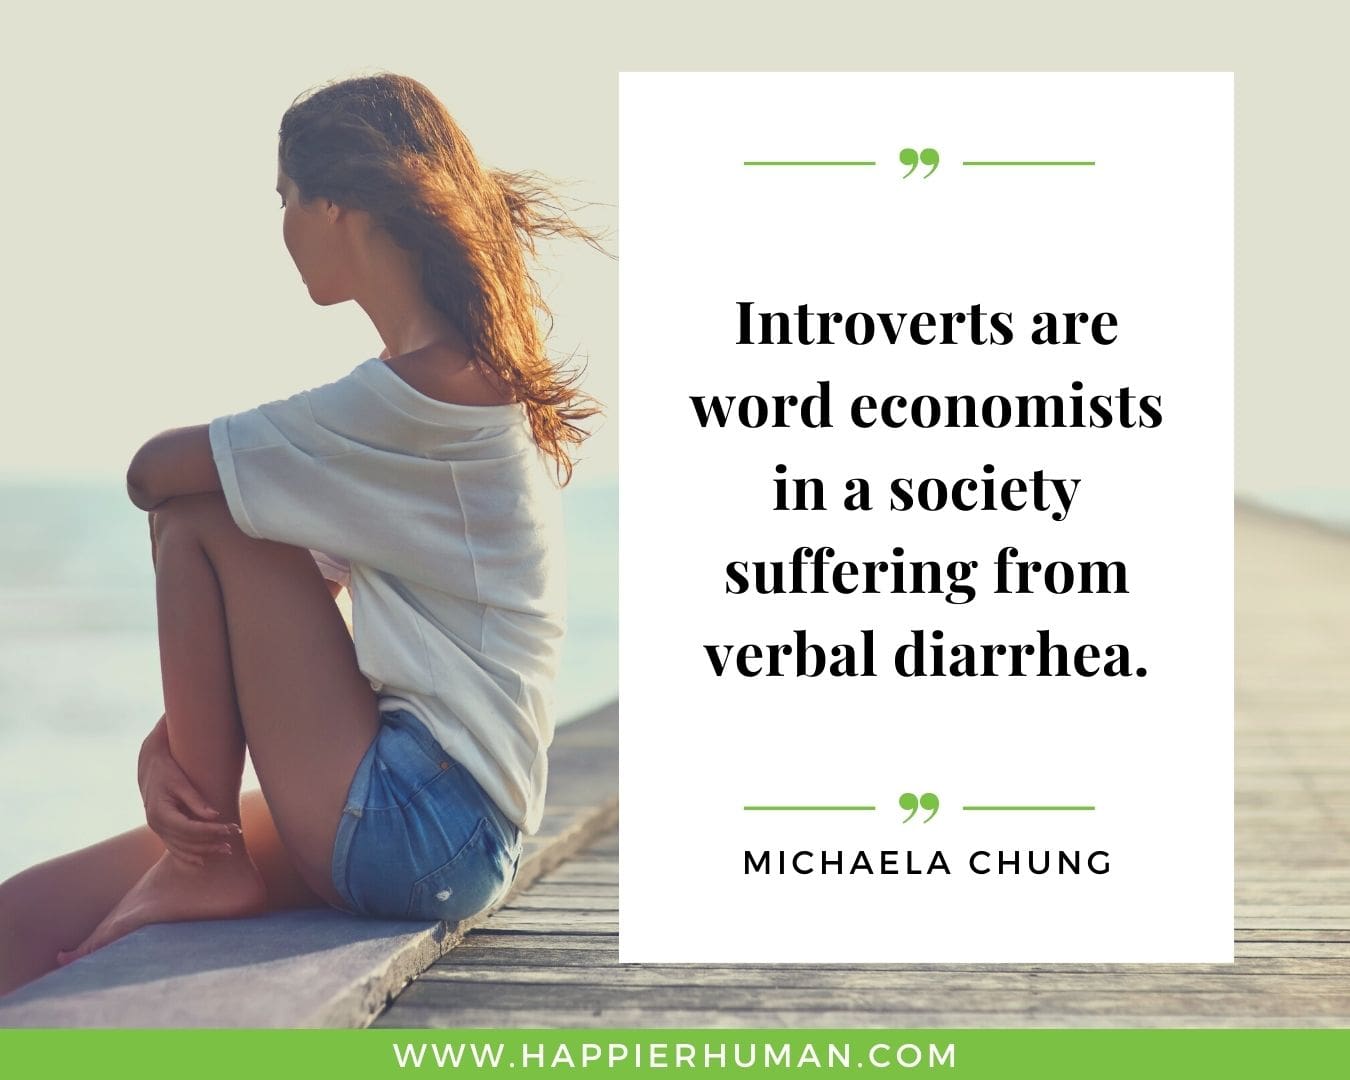 Introvert Quotes - “Introverts are word economists in a society suffering from verbal diarrhea.” – Michaela Chung